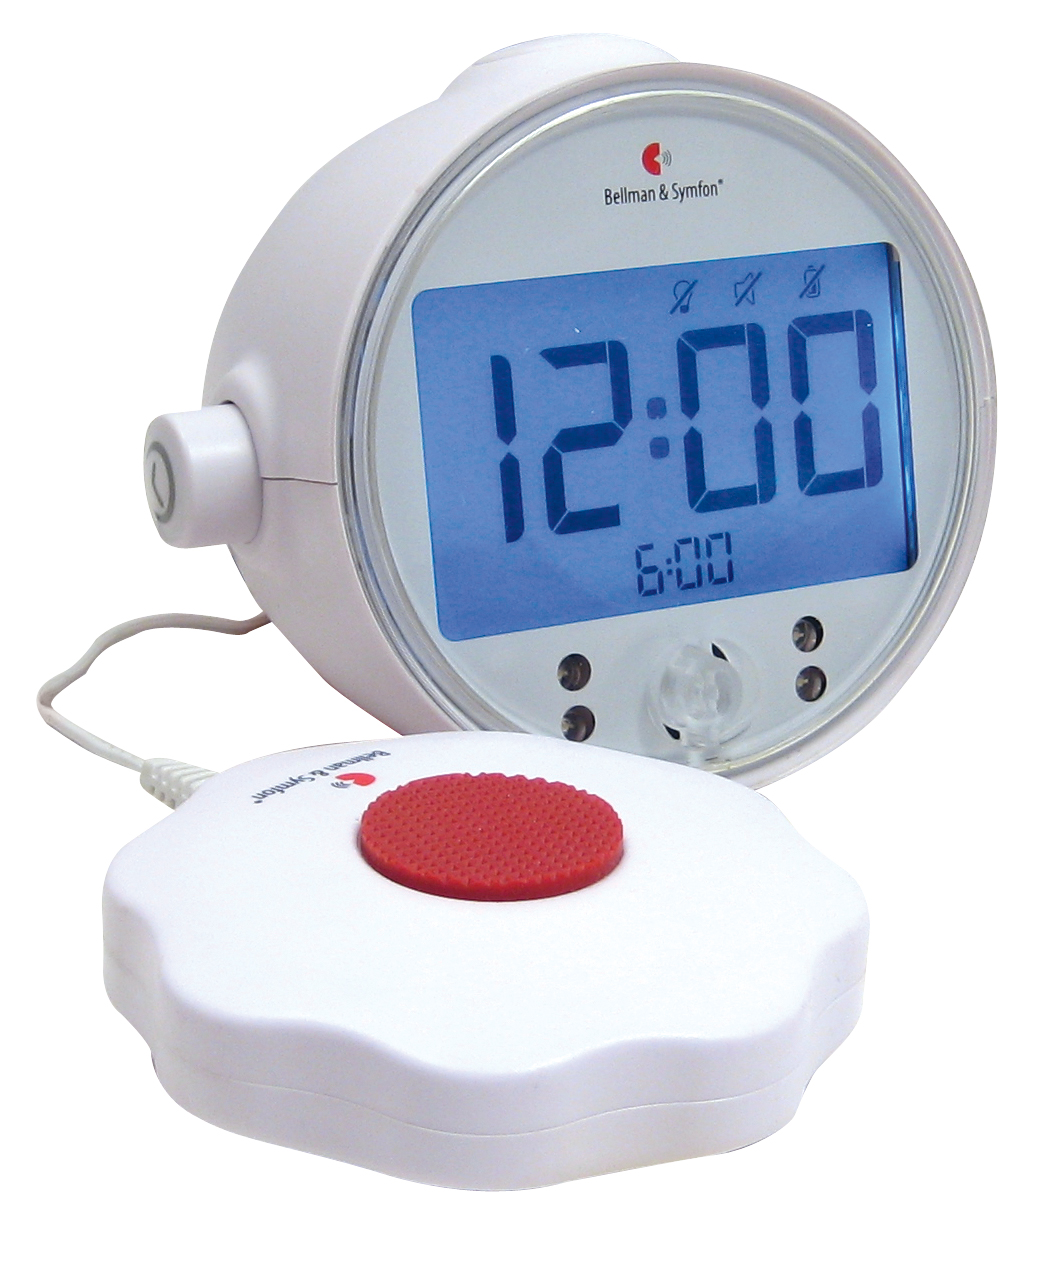 The Classic Vibrating Alarm Clock from Bellman & Symfon wakes with vibration or a loud alarm.